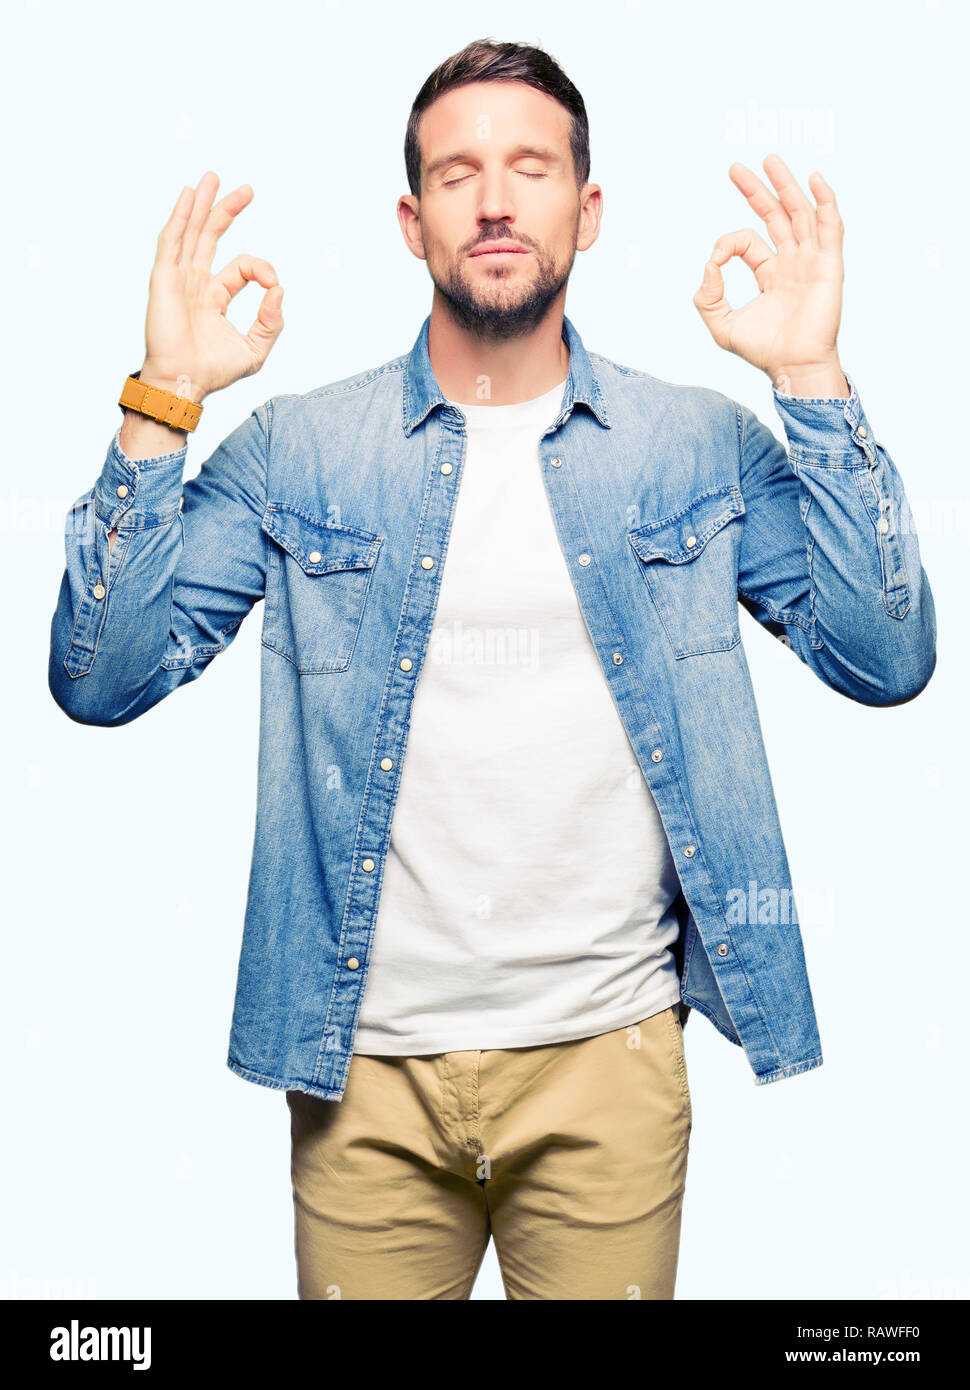 Handsome man with blue eyes and beard wearing denim jacket relax and  smiling with eyes closed doing meditation gesture with fingers. Yoga  concept Stock Photo - Alamy